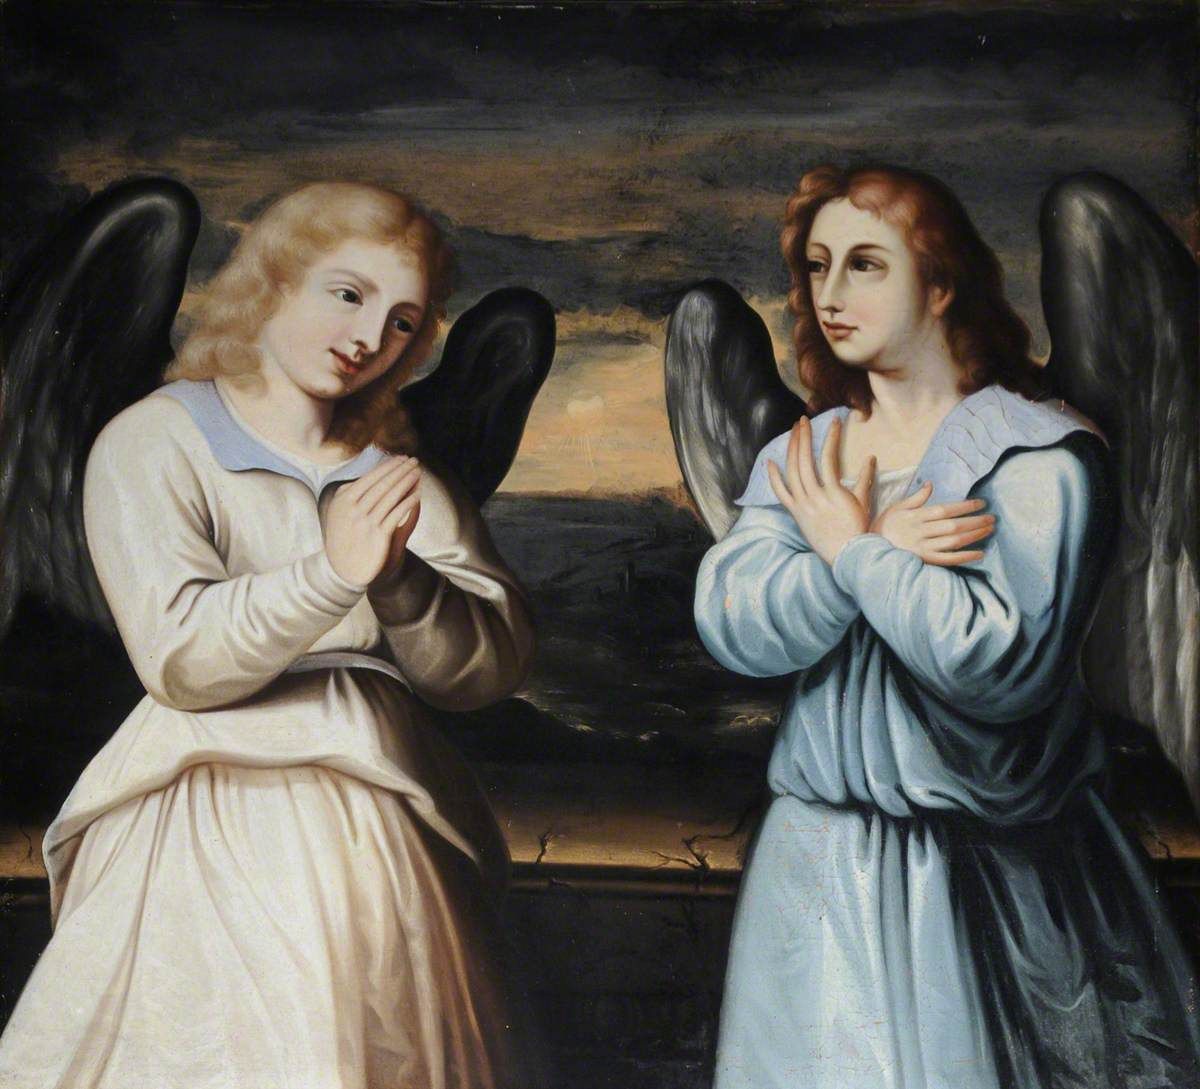 Two Praying Angels by Jacopo Palma il Giovane (16th Century) - Public Domain Catholic Paintings